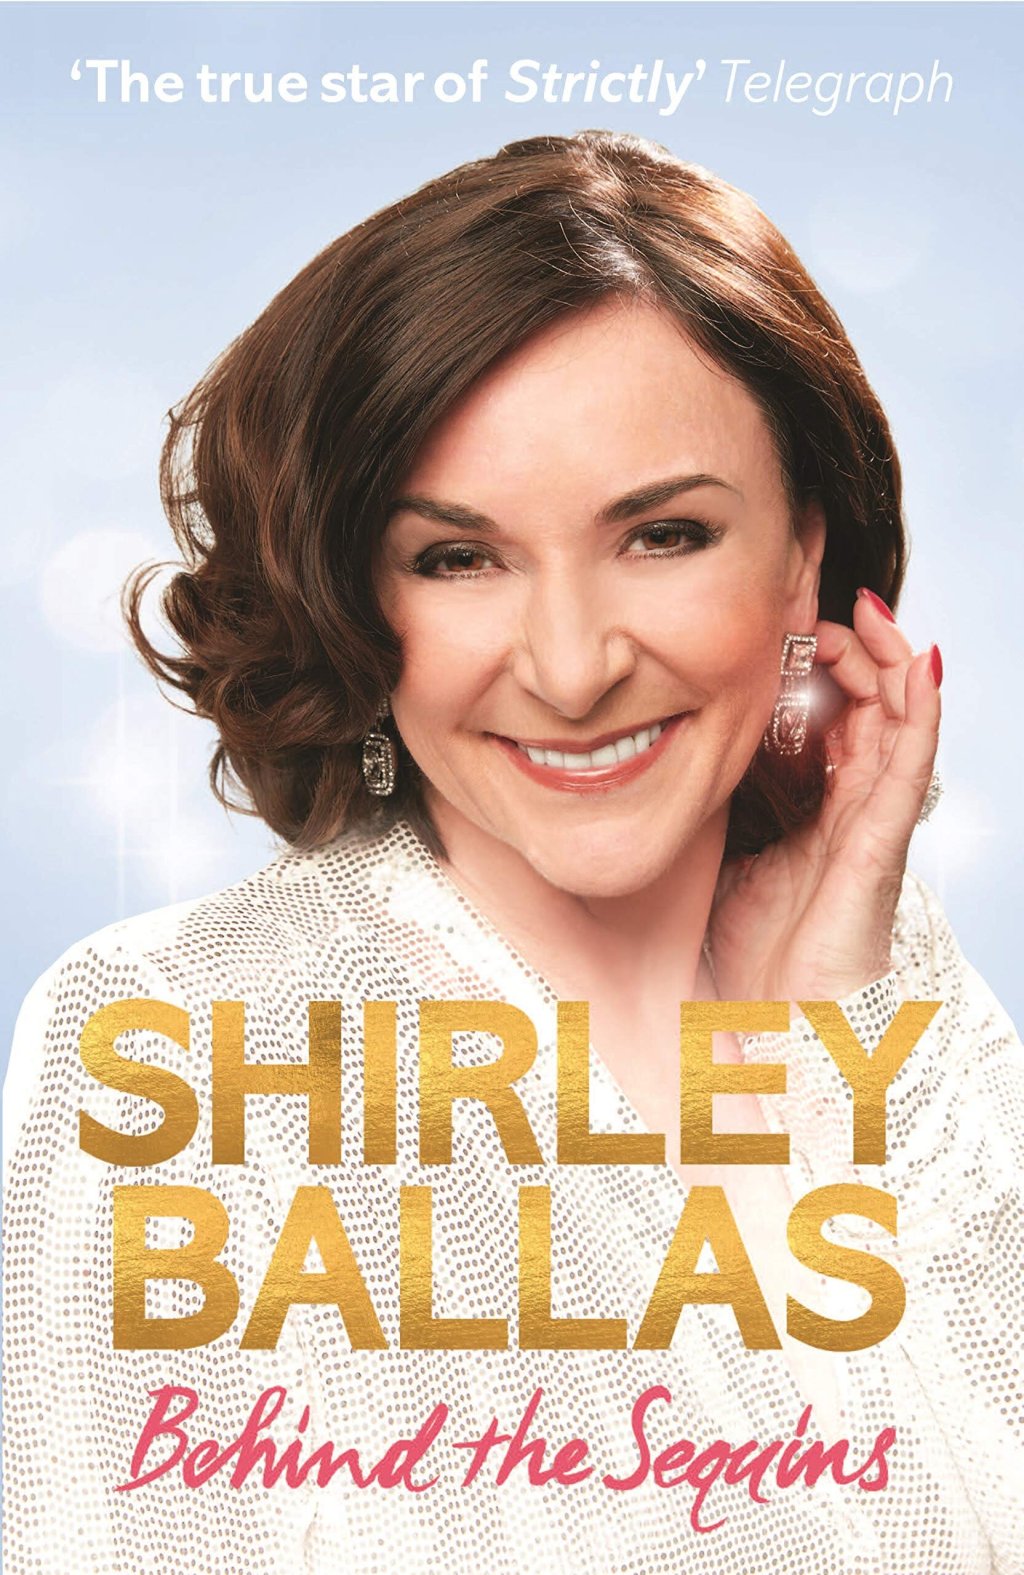 Book Review: Behind the Sequins by Shirley Ballas